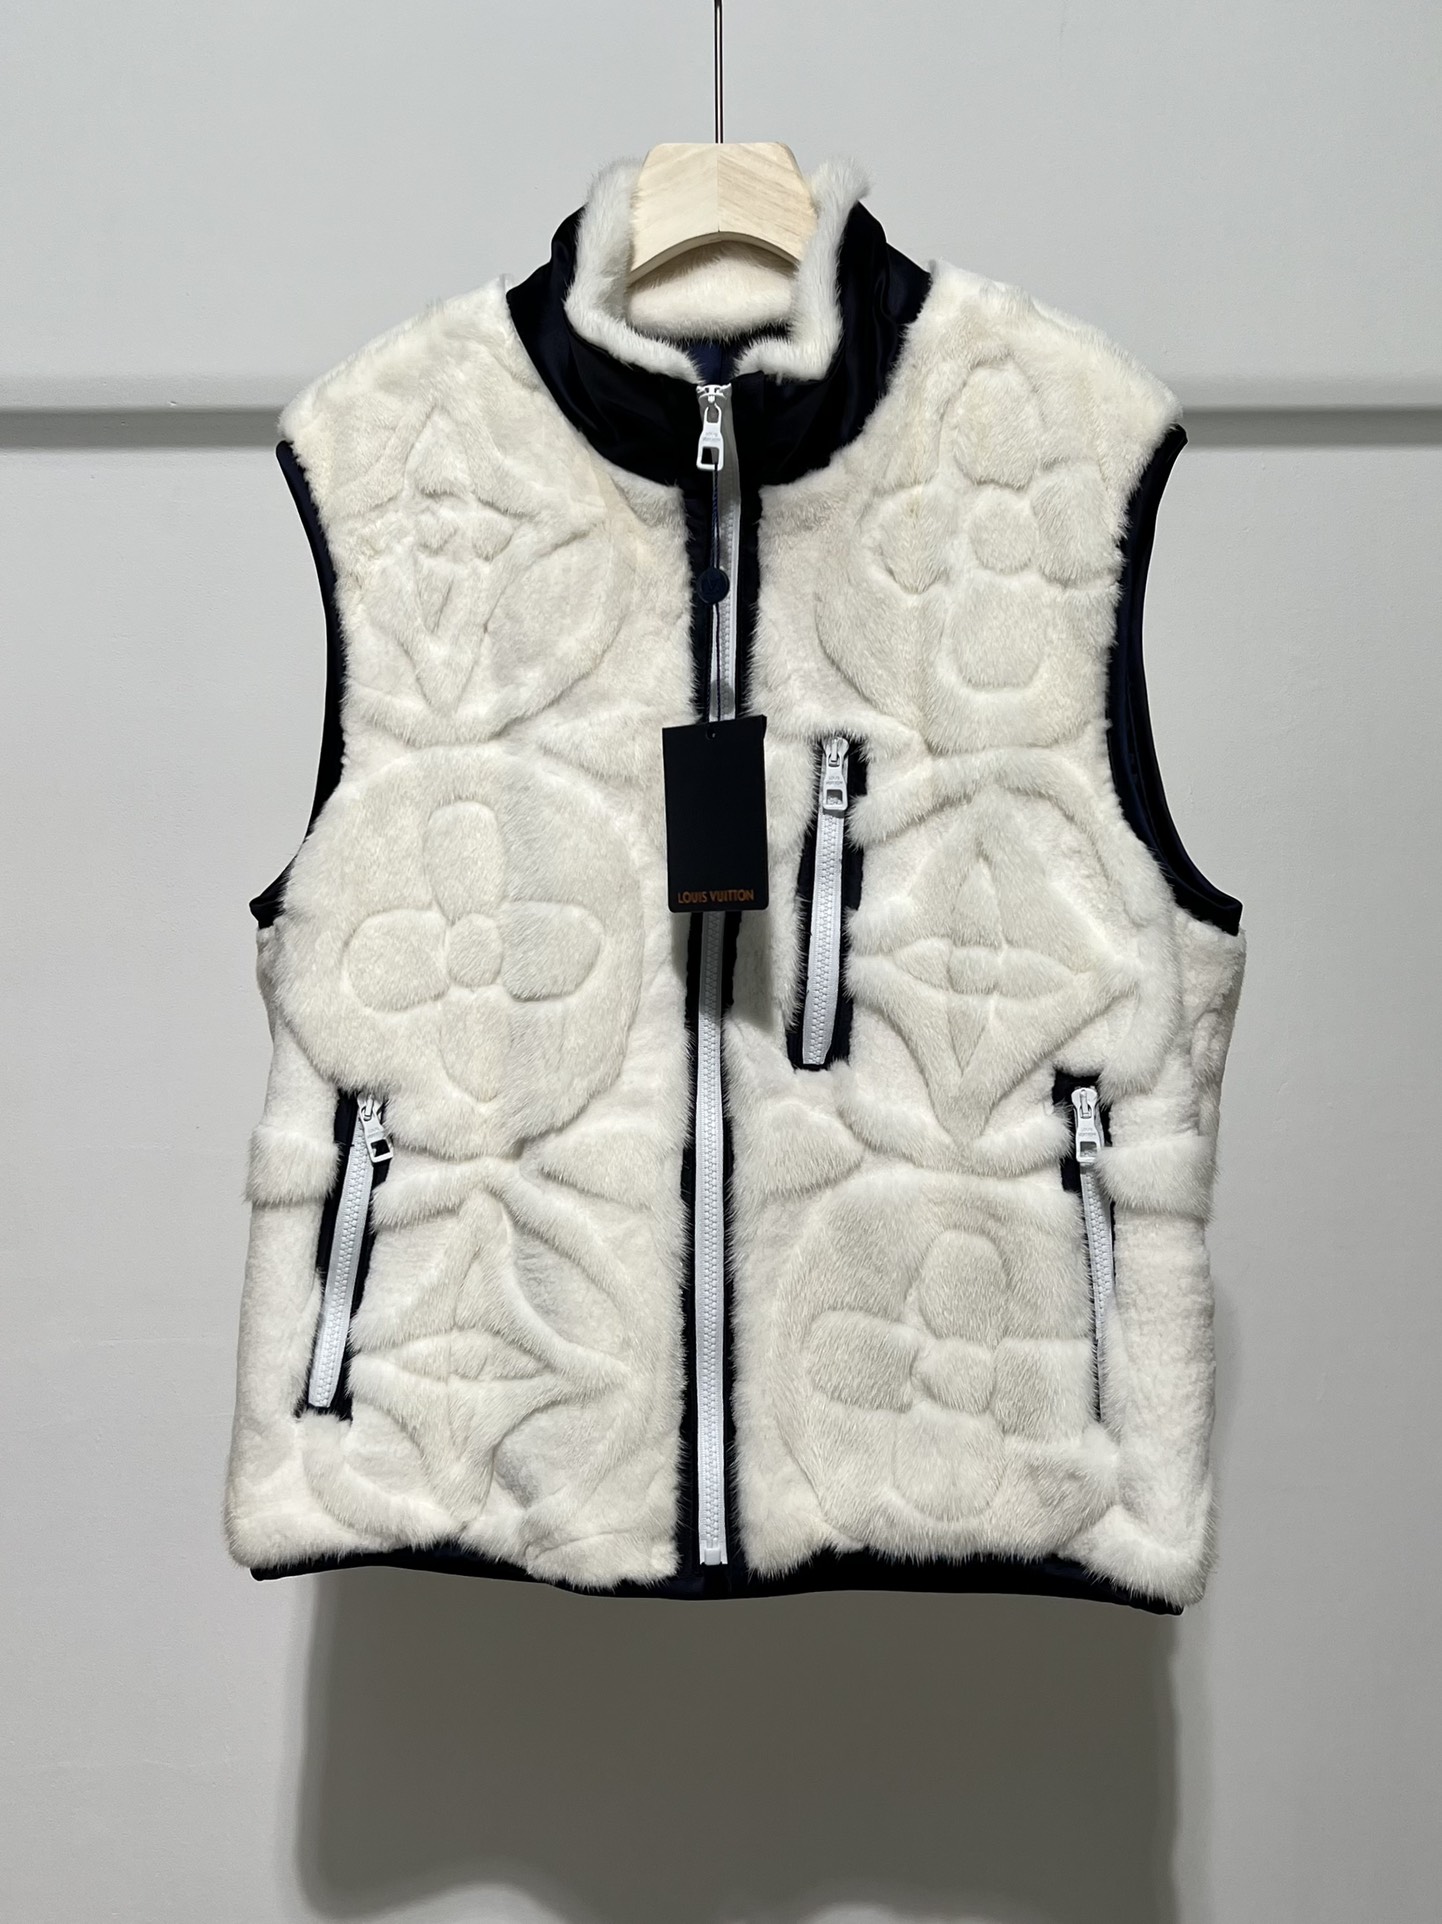 Styles & Where to Buy
 Louis Vuitton Clothing Waistcoat